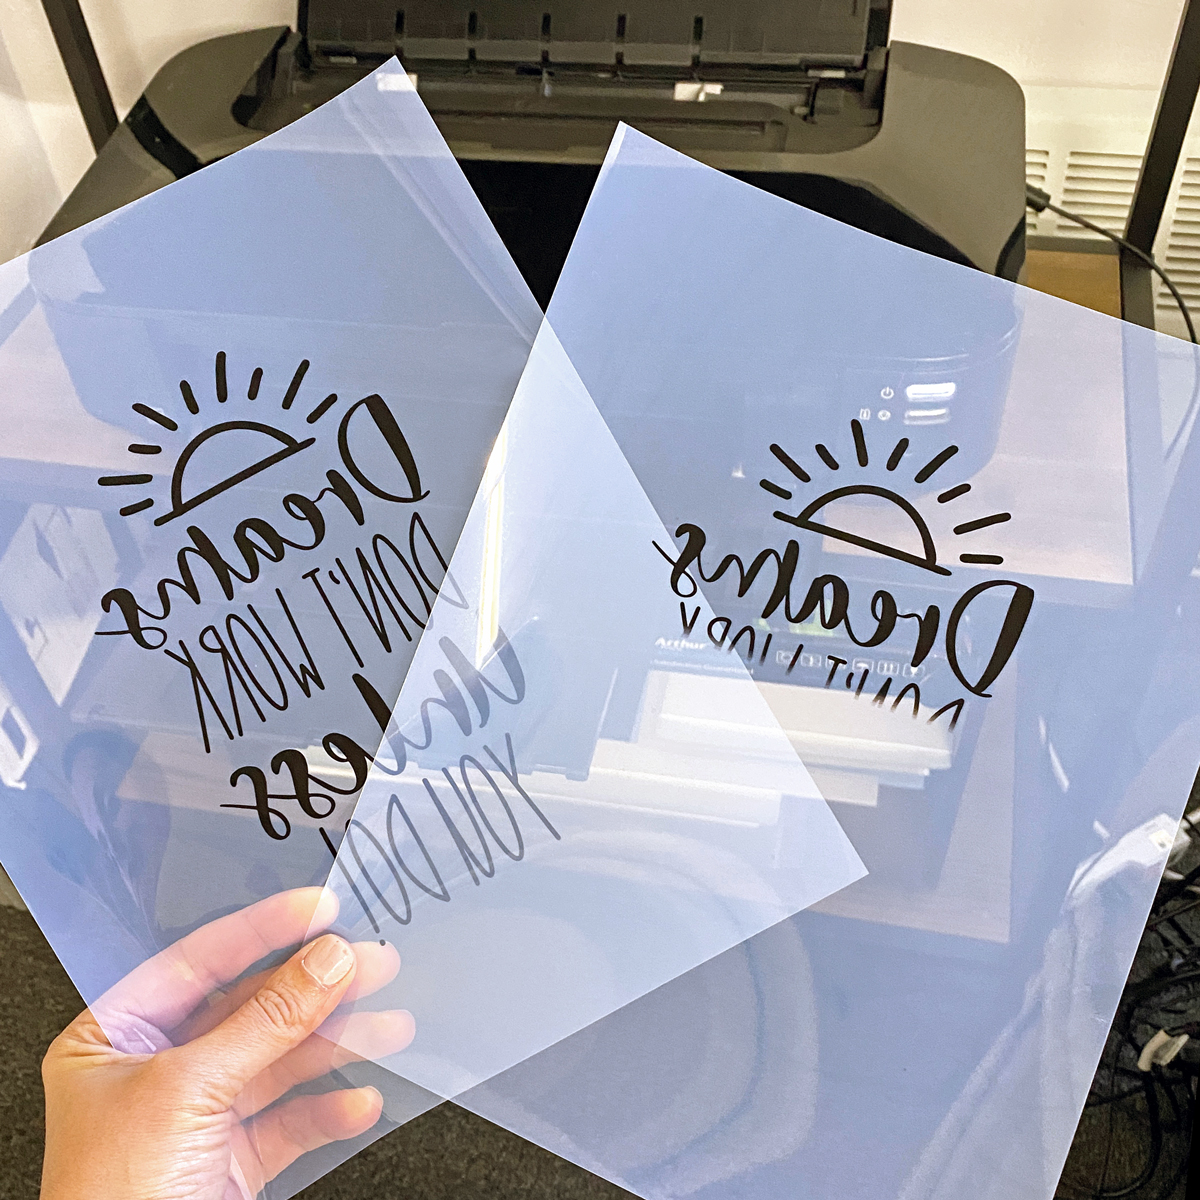  Customer reviews: Inkjet Printable Window Cling - 8.5 x 11  inches - 2 Pieces